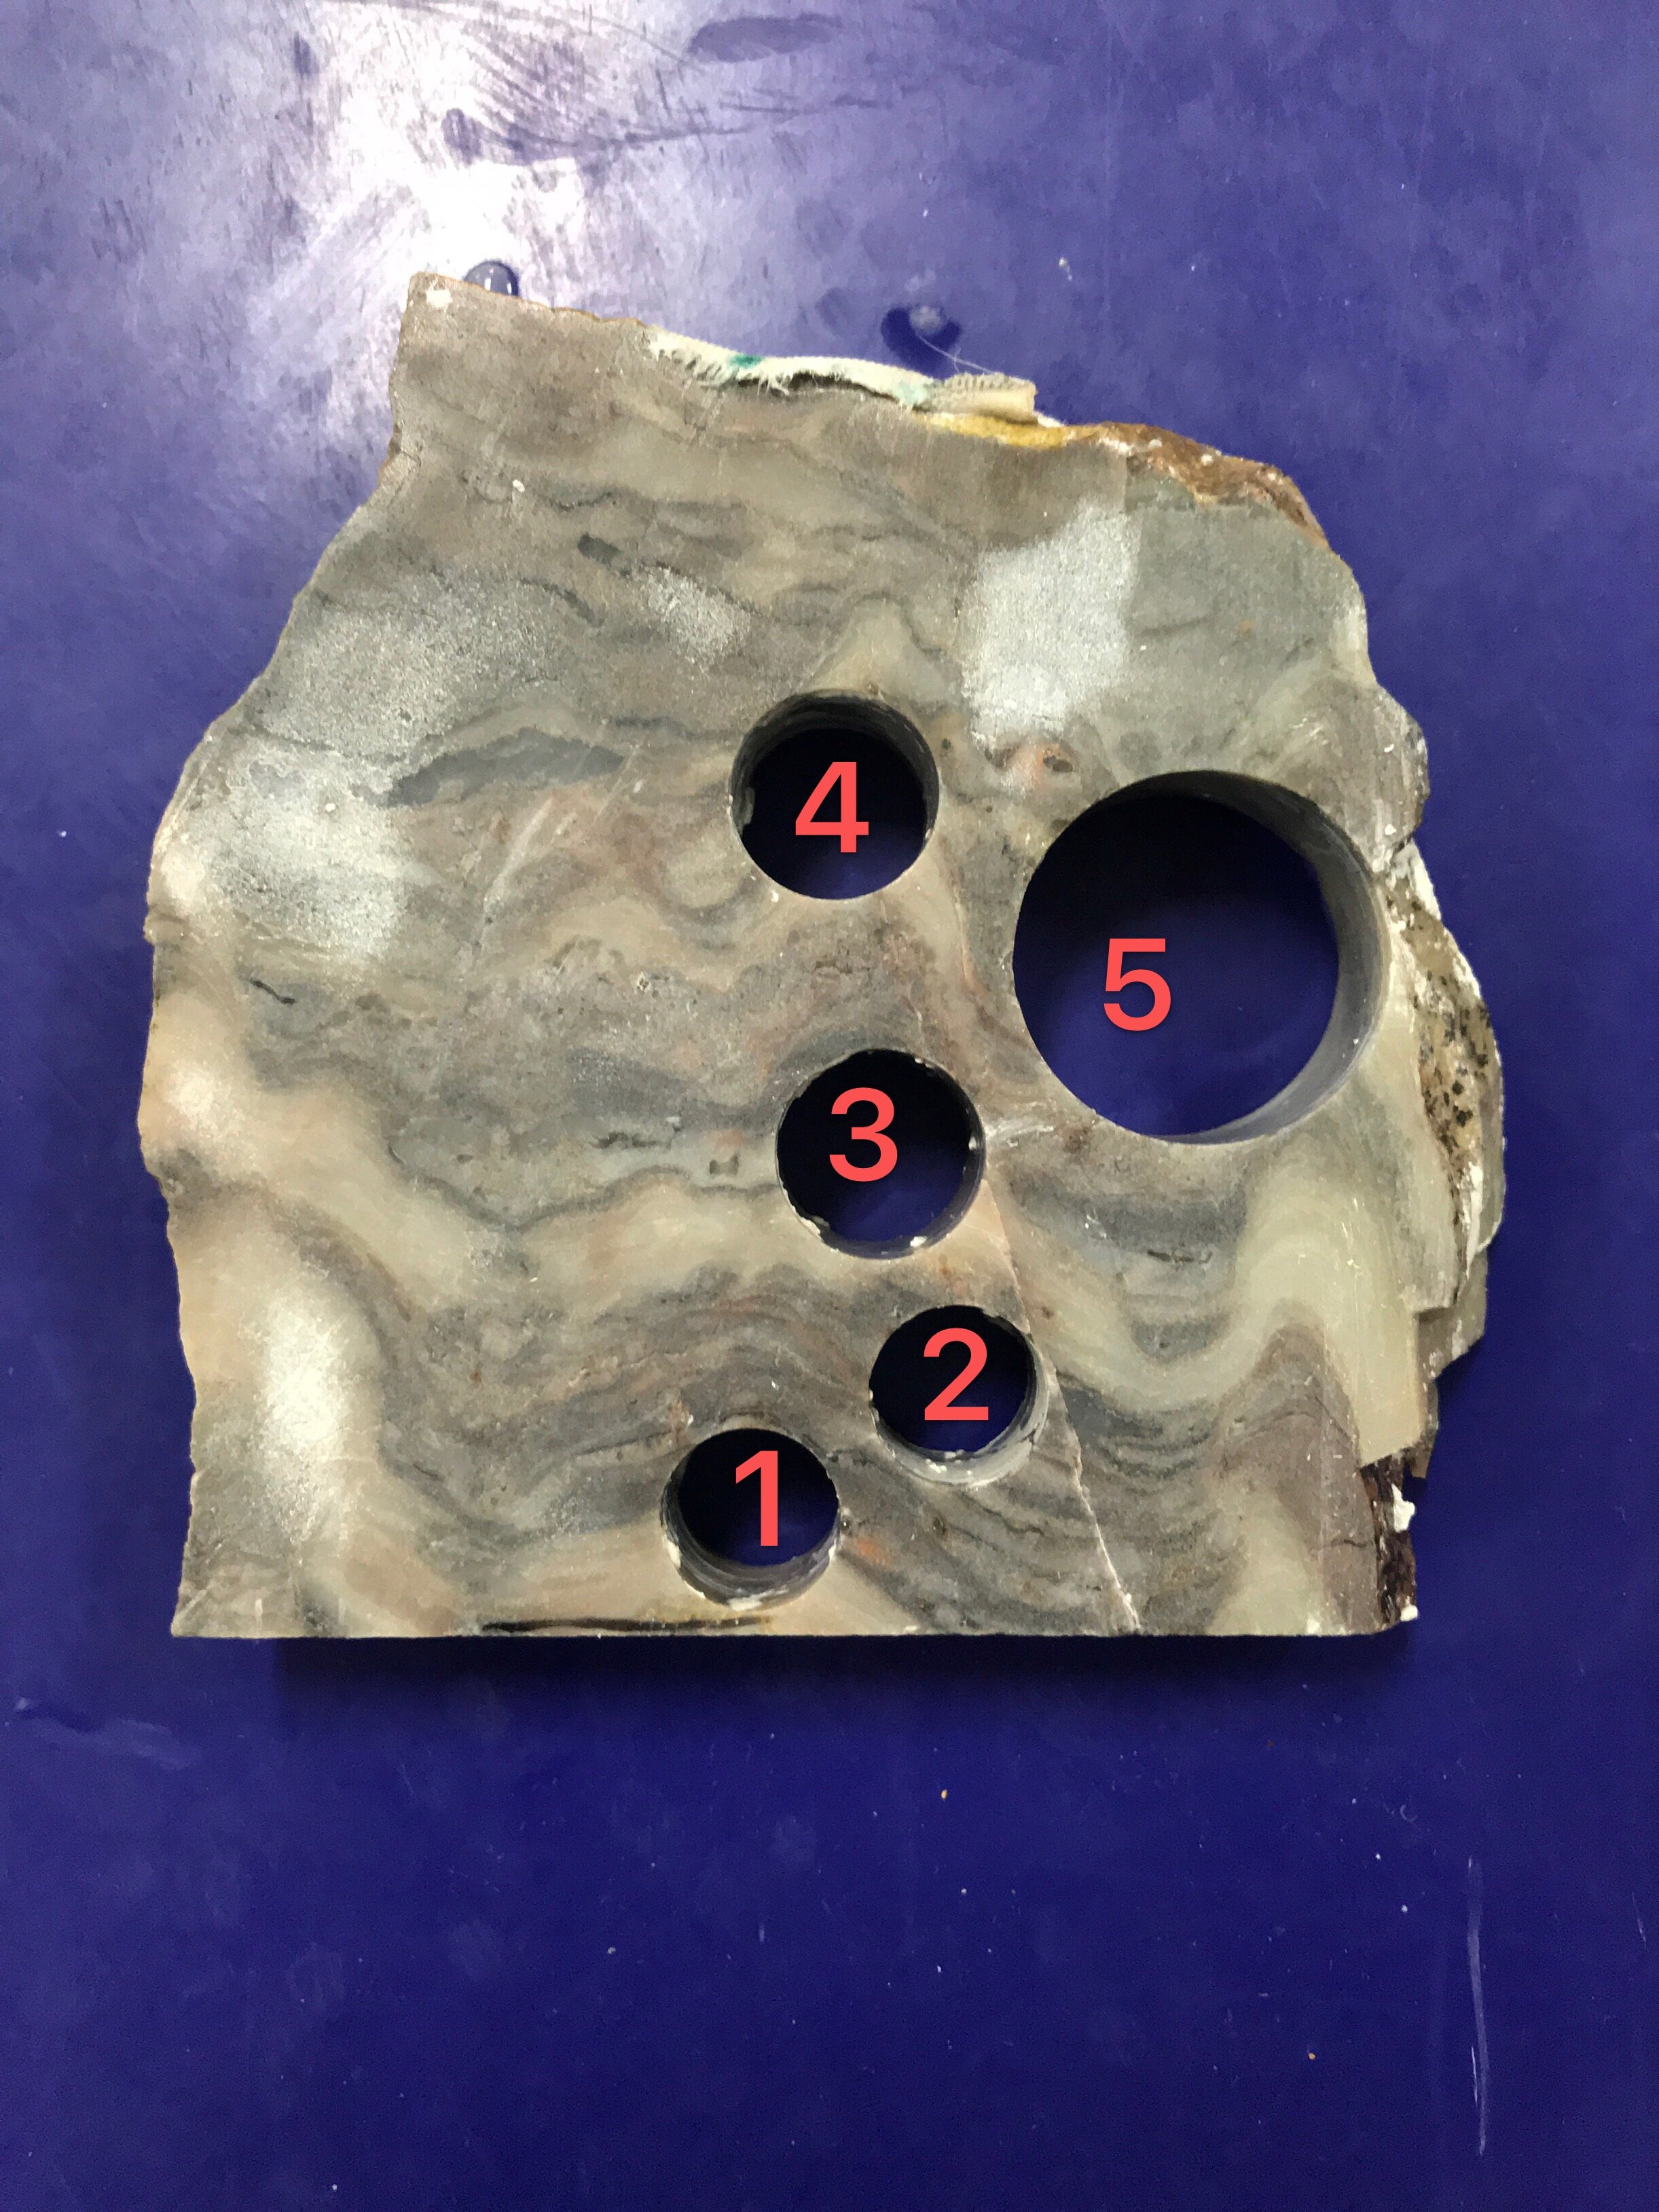 Archean stromatolite slab with drill cores for isotope analysis